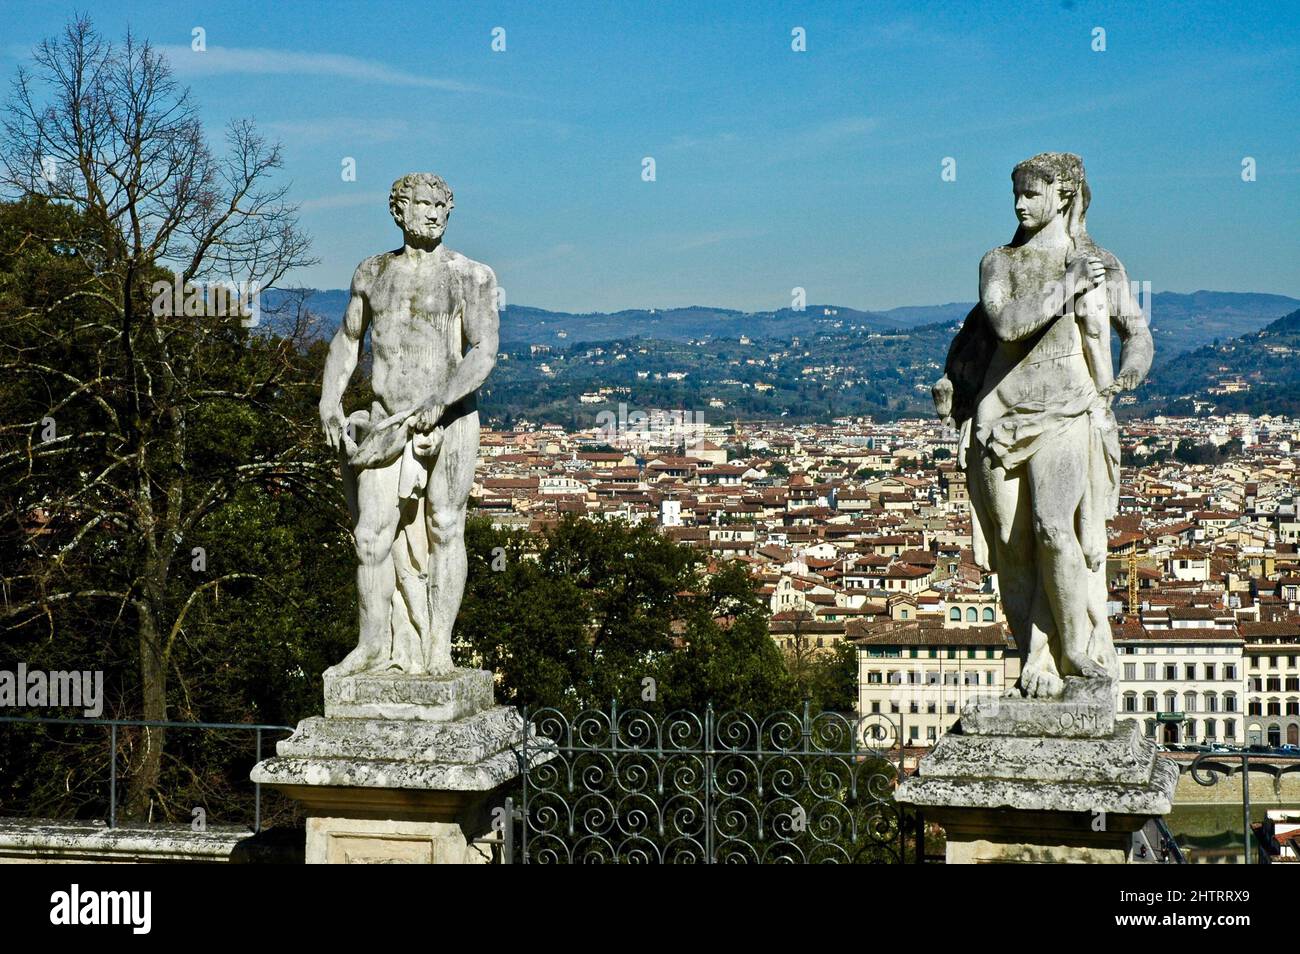 Panorama of Florence seen from Villa Bardini with surrounding ancient statues Stock Photo